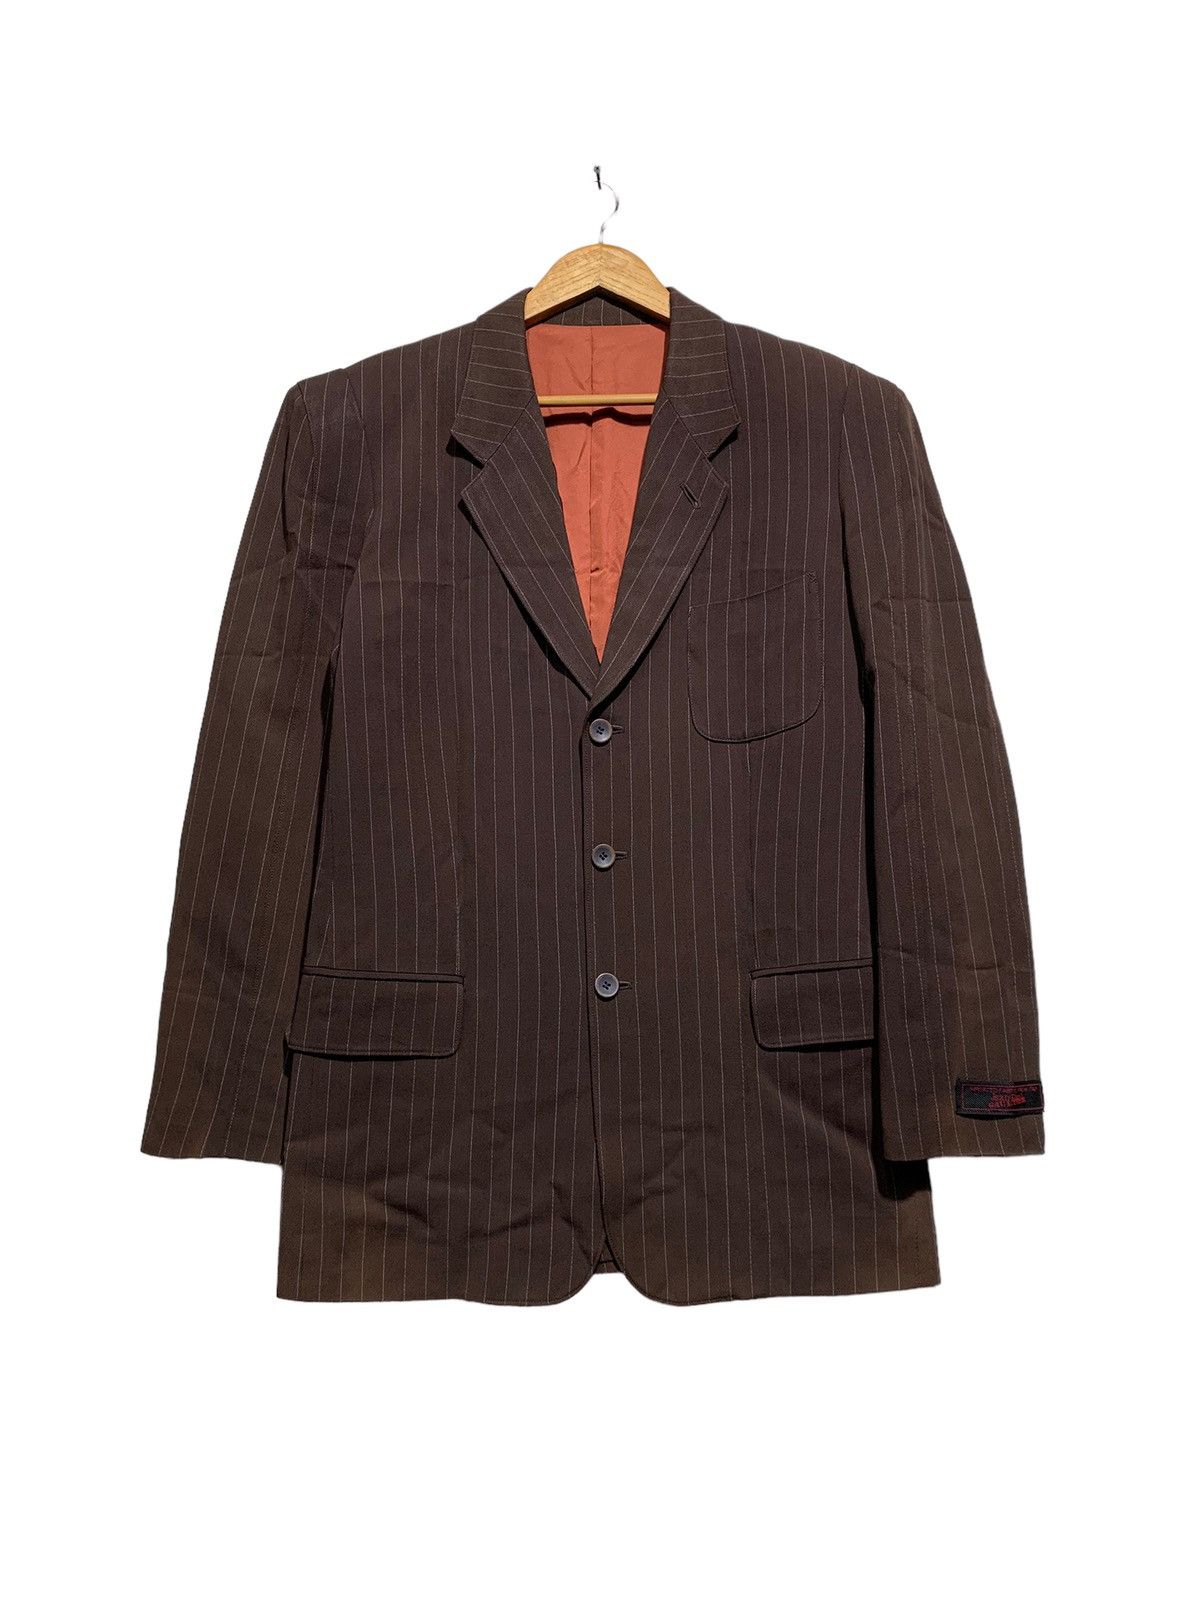 🔥JPG CLASSIC BROWN CASUAL JACKETS - 1